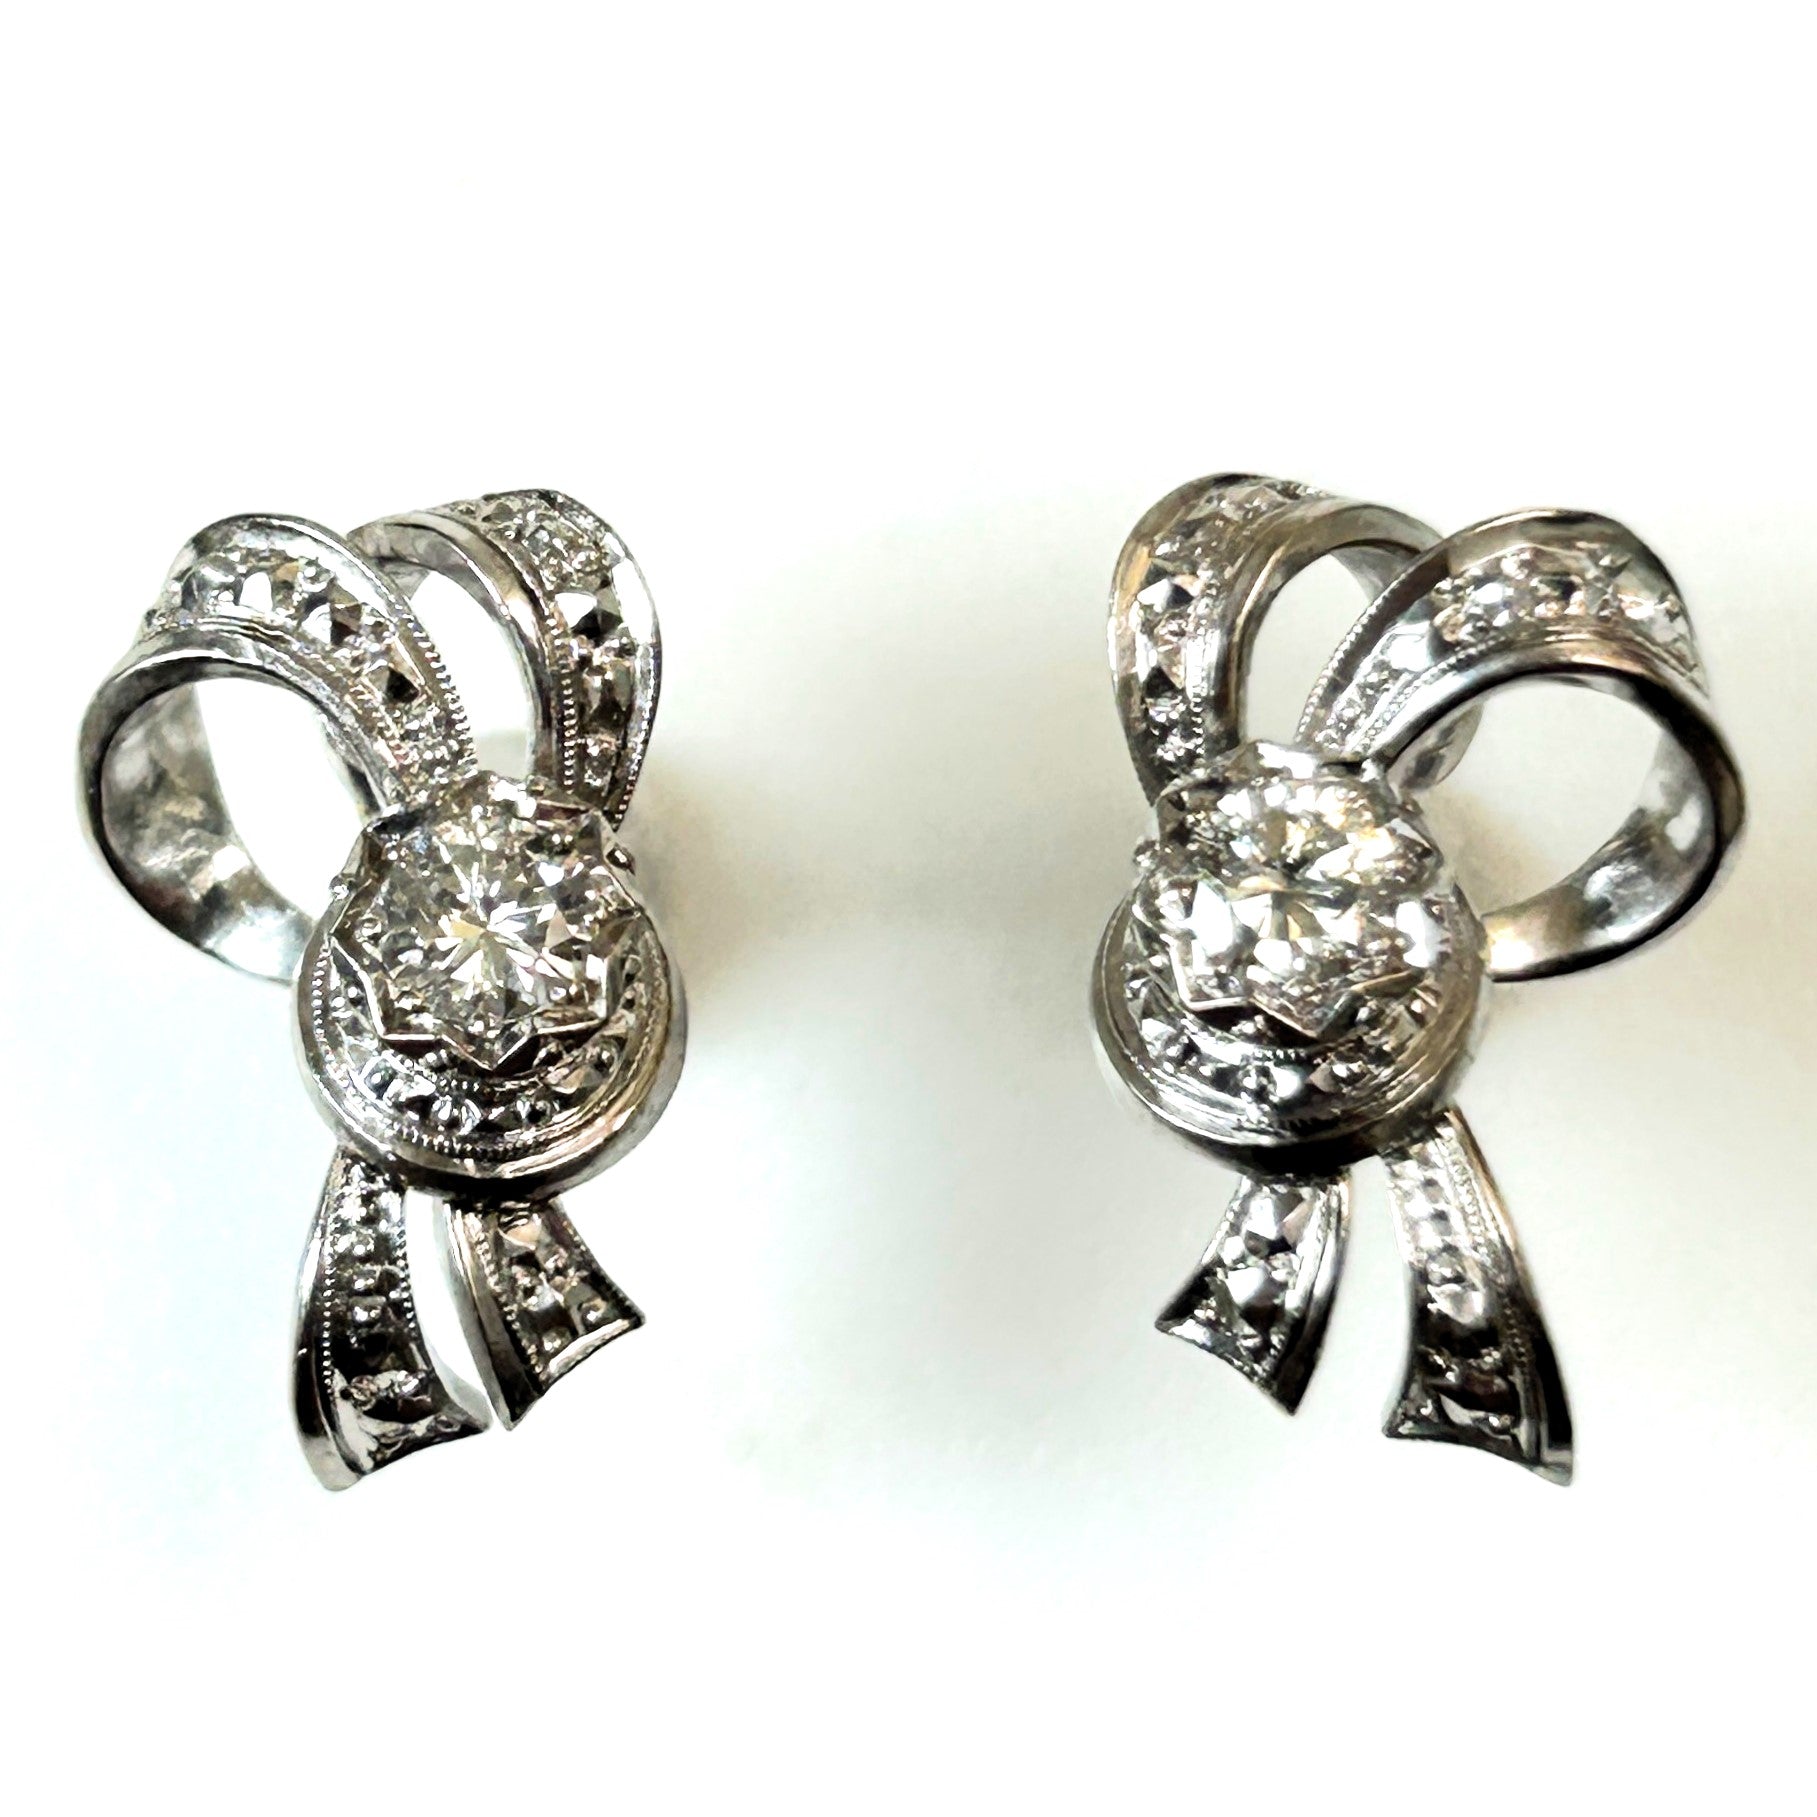 Vintage 18ct White Gold and Diamond "Ribbons" Stud Earrings